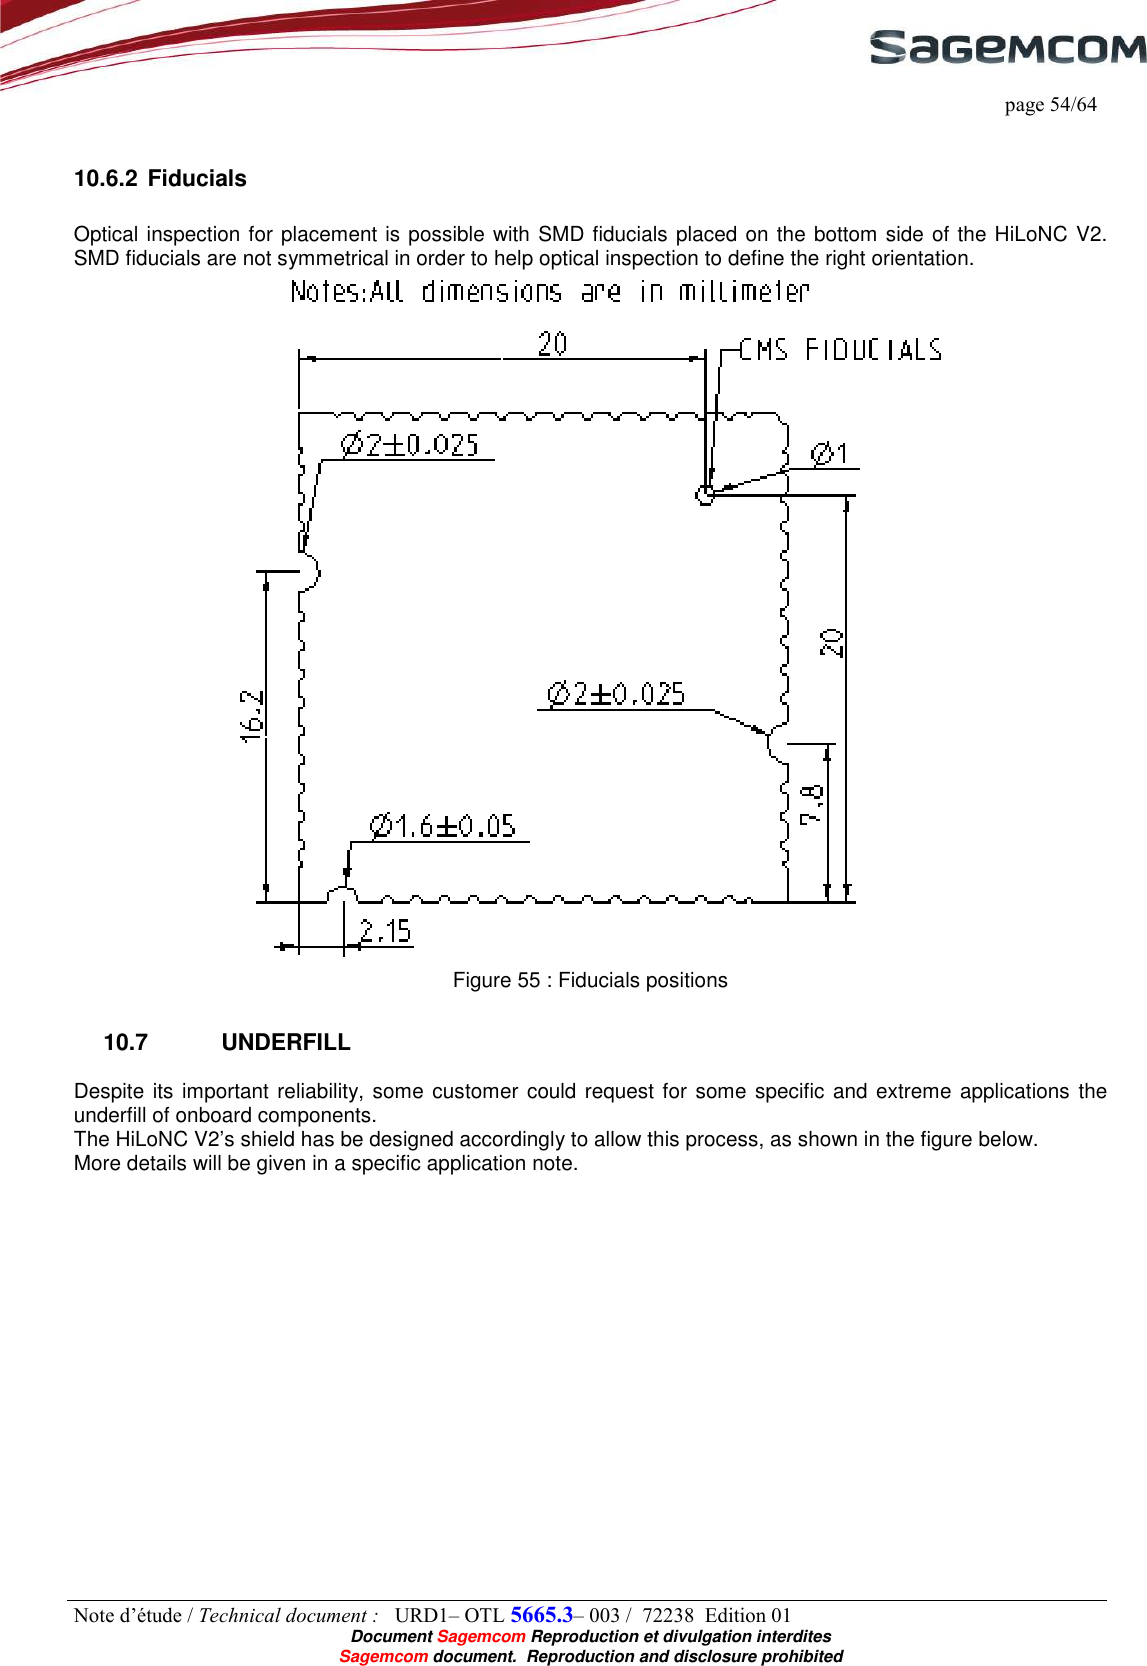     page 54/64 Note d’étude / Technical document :   URD1– OTL 5665.3– 003 /  72238  Edition 01  Document Sagemcom Reproduction et divulgation interdites Sagemcom document.  Reproduction and disclosure prohibited  10.6.2 Fiducials  Optical inspection for placement is possible with SMD fiducials placed on the bottom side of the HiLoNC V2. SMD fiducials are not symmetrical in order to help optical inspection to define the right orientation.  Figure 55 : Fiducials positions 10.7  UNDERFILL Despite its important reliability, some customer could request for some specific and extreme applications  the underfill of onboard components. The HiLoNC V2’s shield has be designed accordingly to allow this process, as shown in the figure below. More details will be given in a specific application note. 